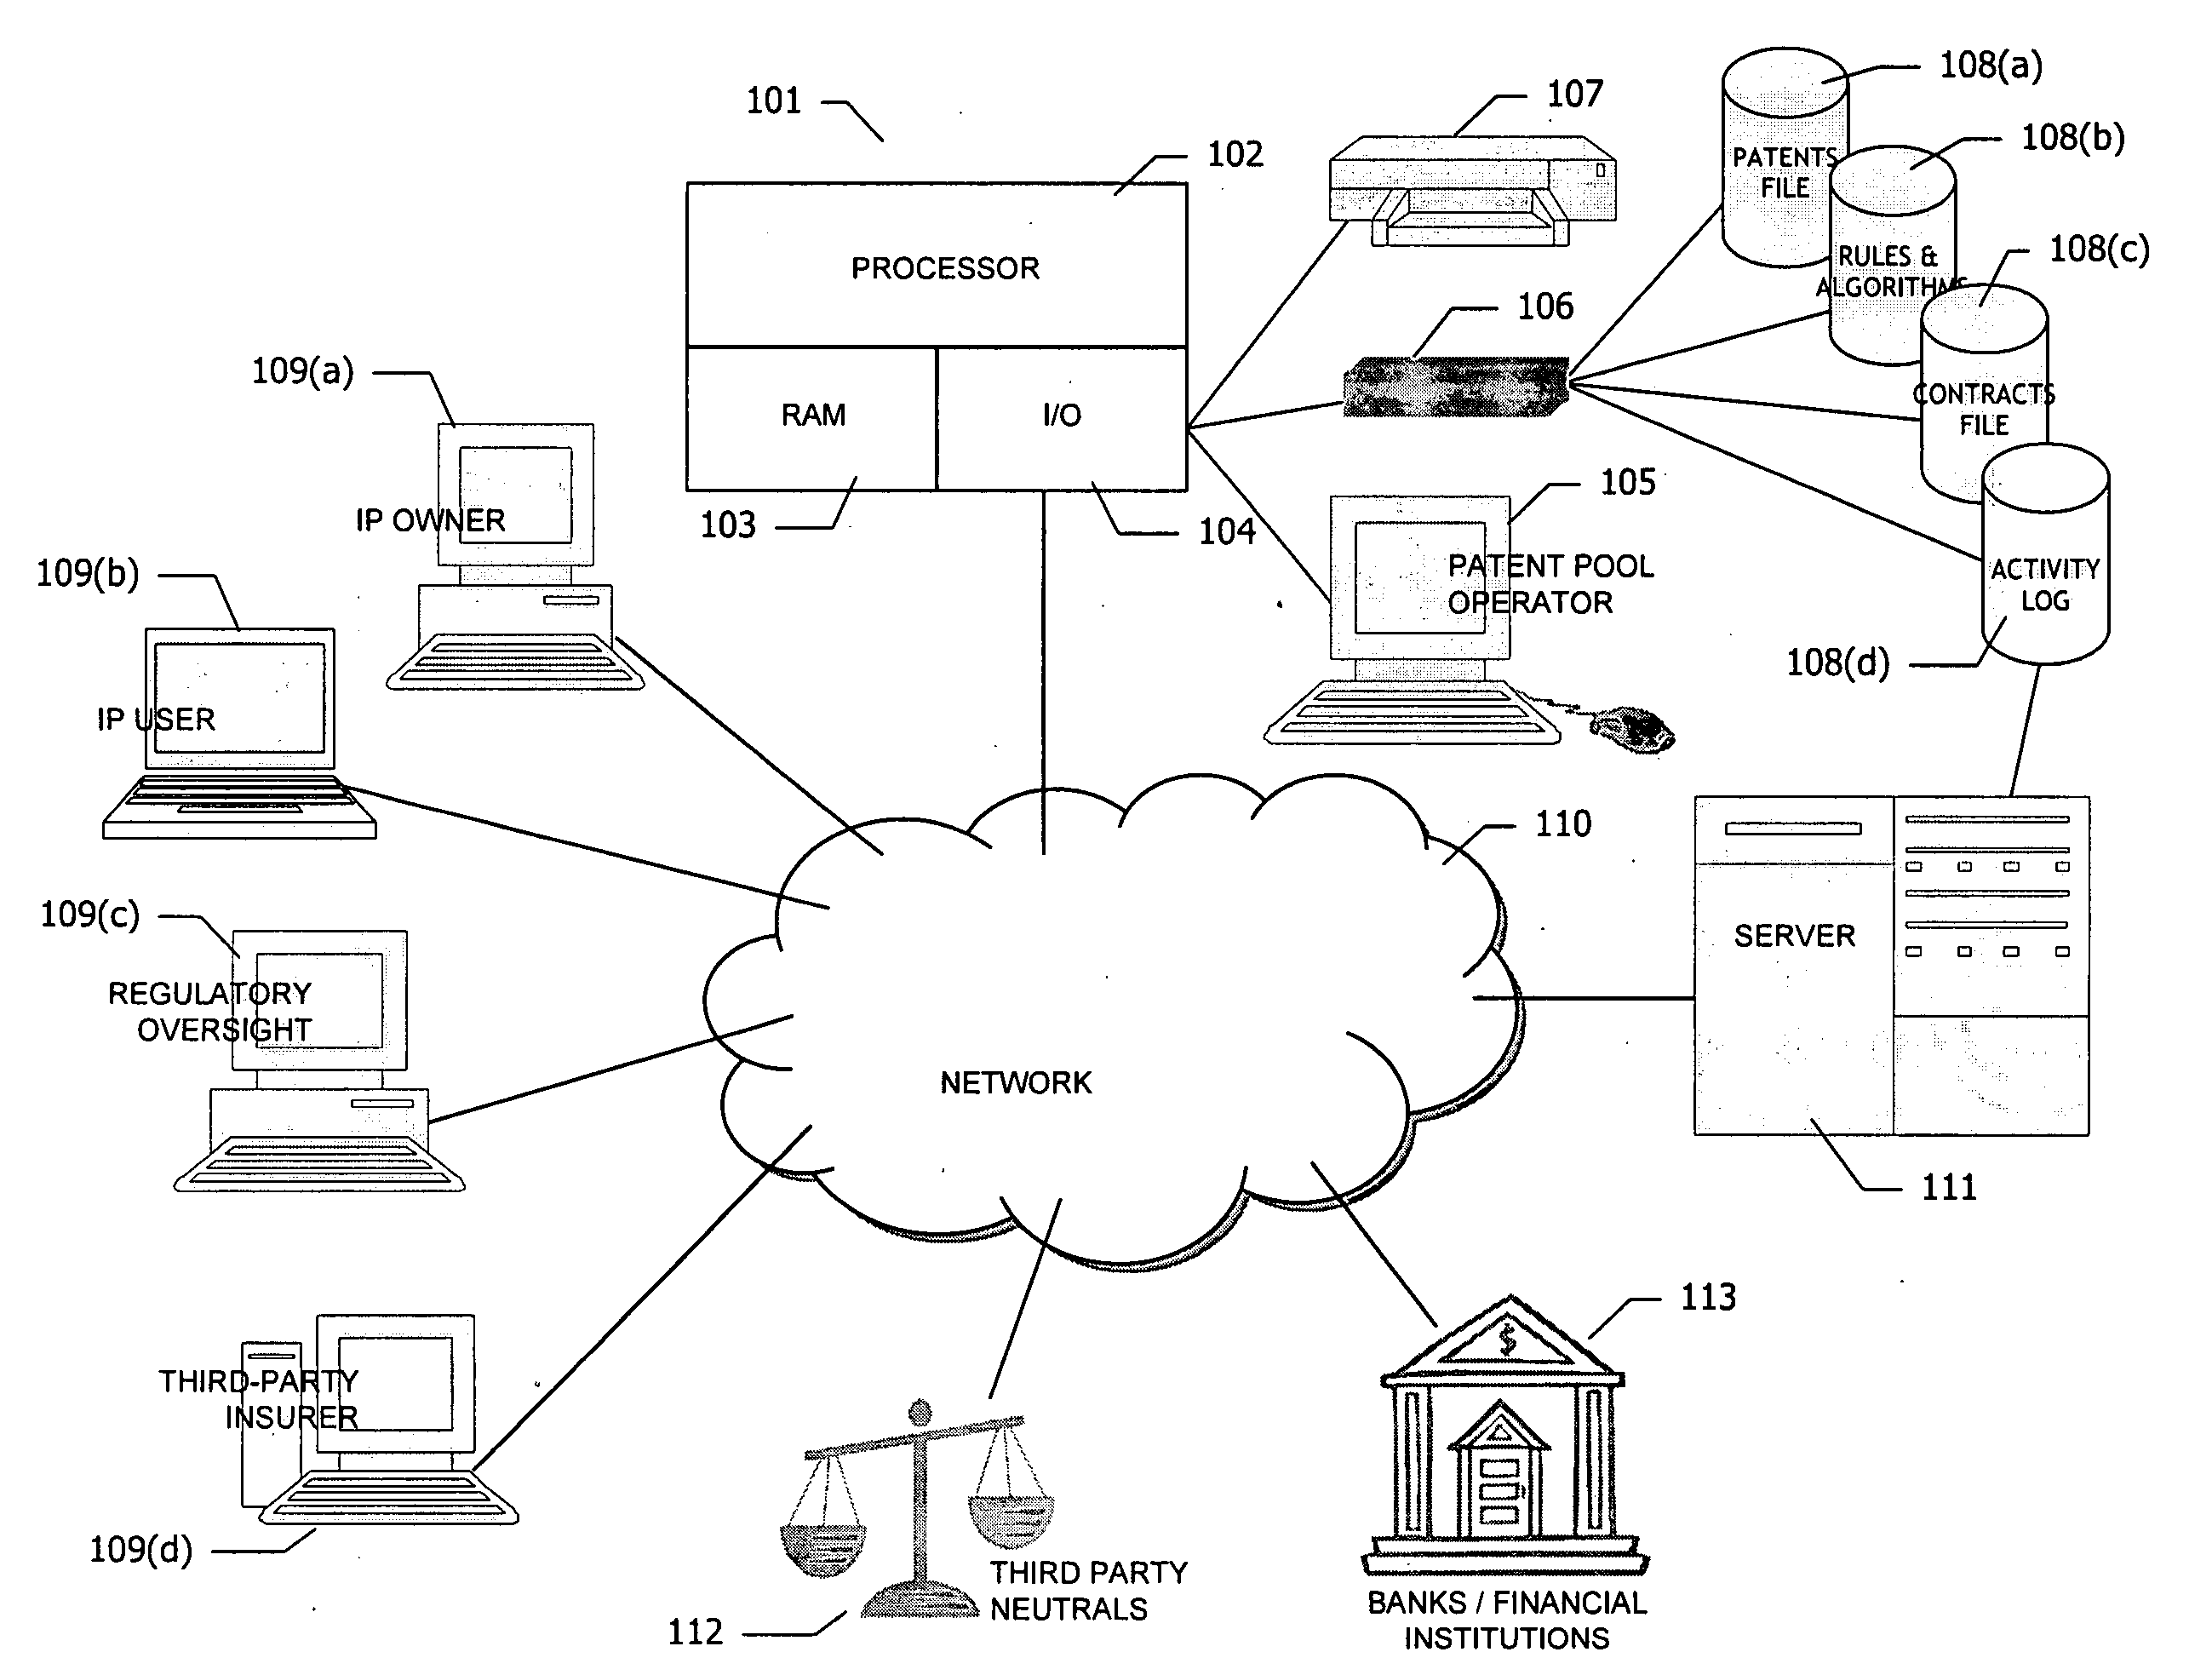 System and method of licensing intellectual property assets